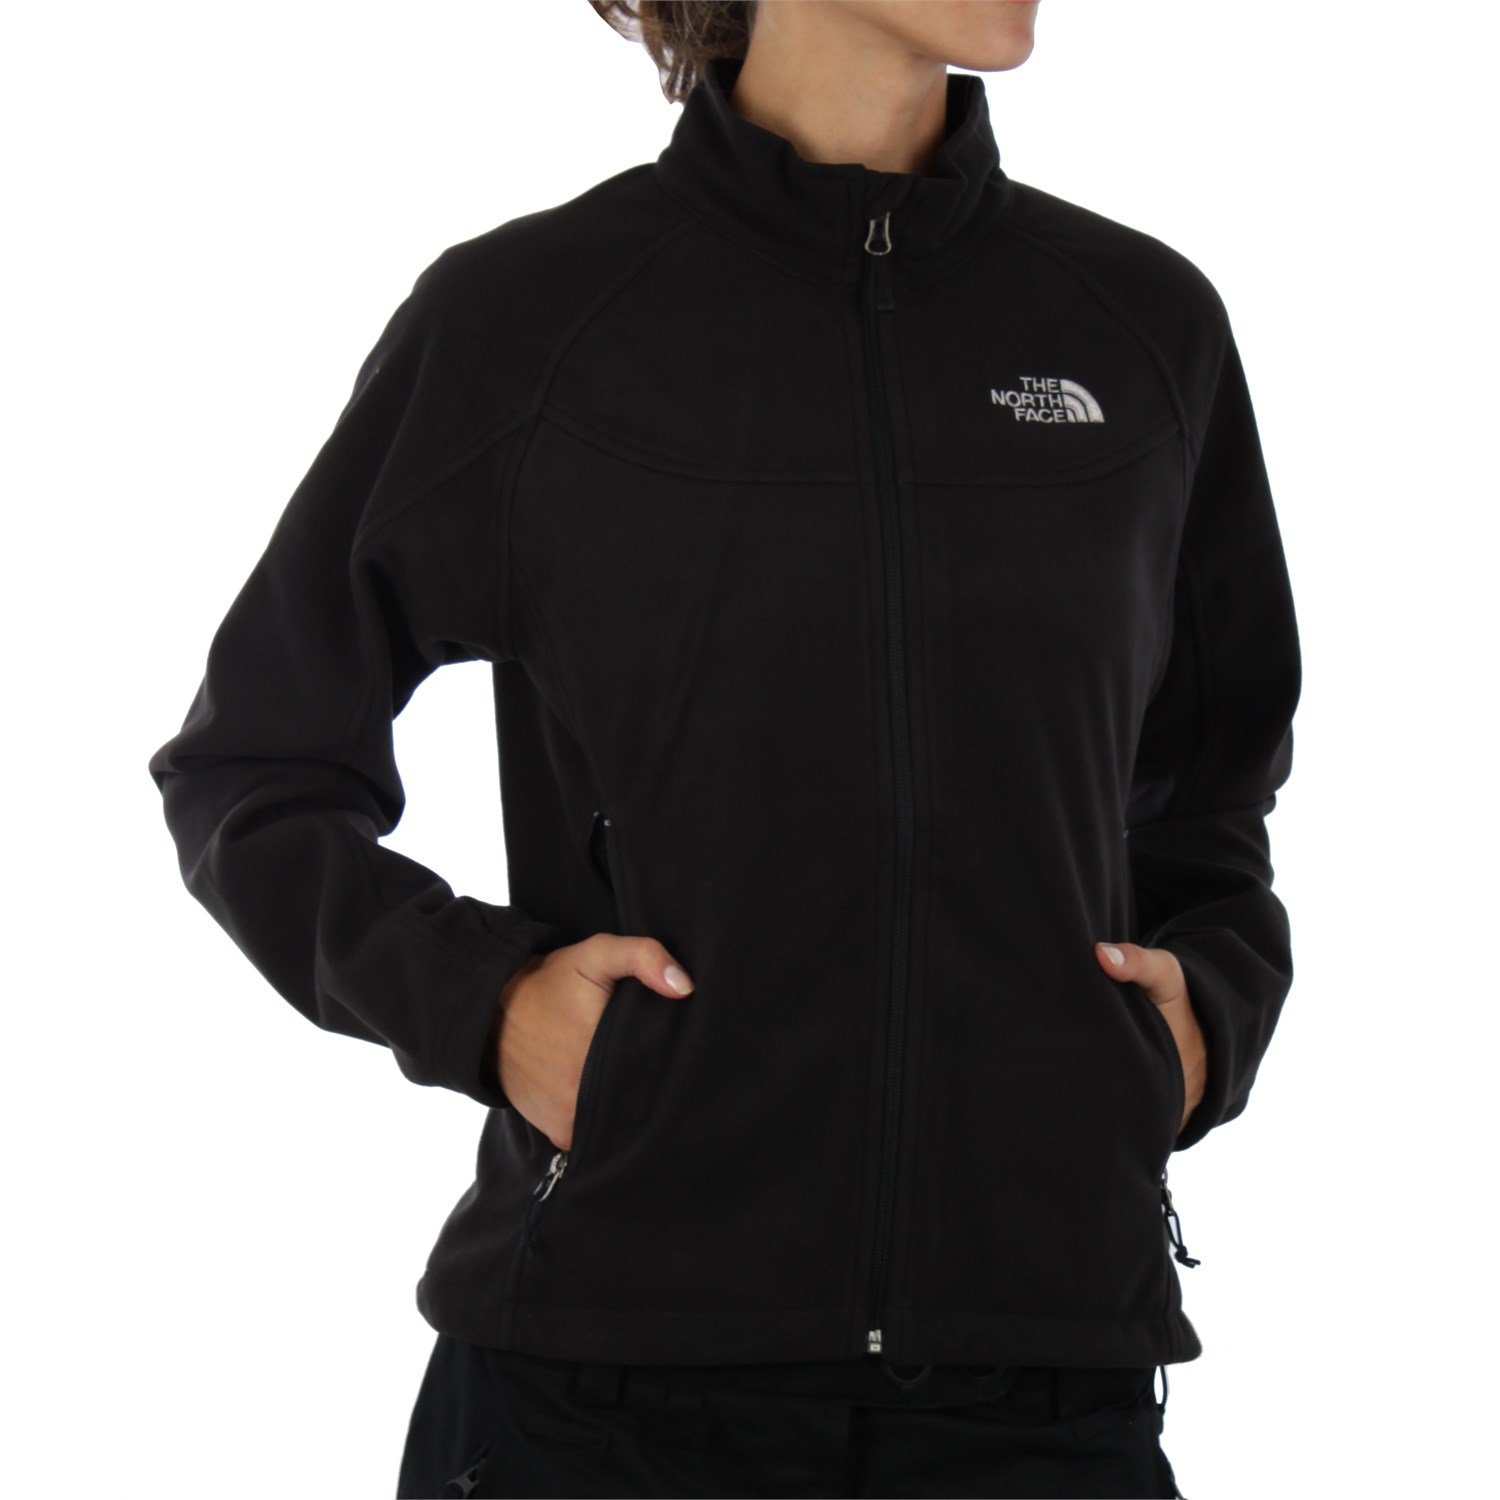 https://images.evo.com/imgp/zoom/48885/285626/the-north-face-windwall-1-jacket-women-s-.jpg